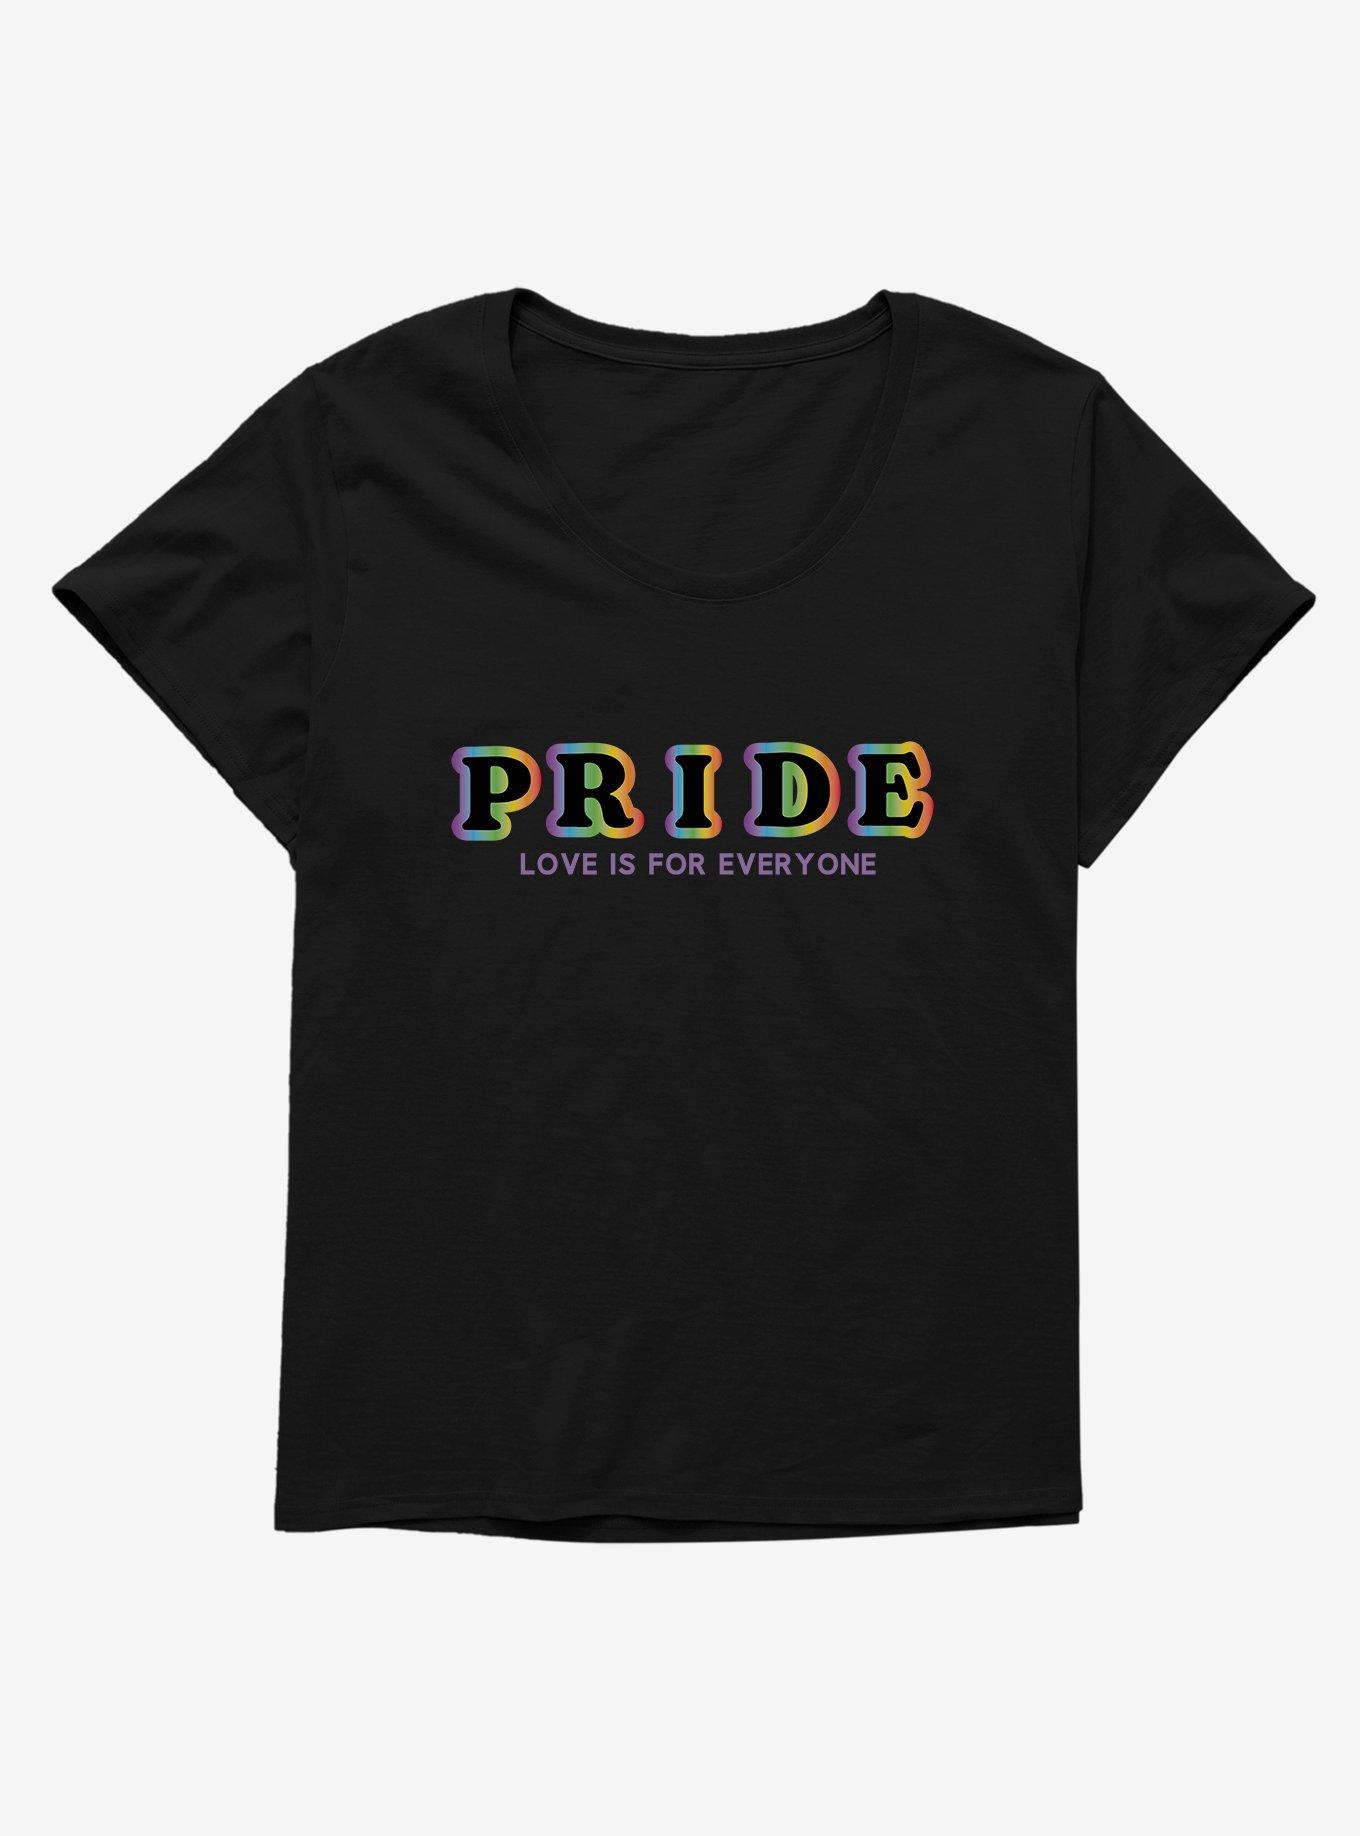 Pride Love Is For Everyone Girls T-Shirt Plus Size, BLACK, hi-res